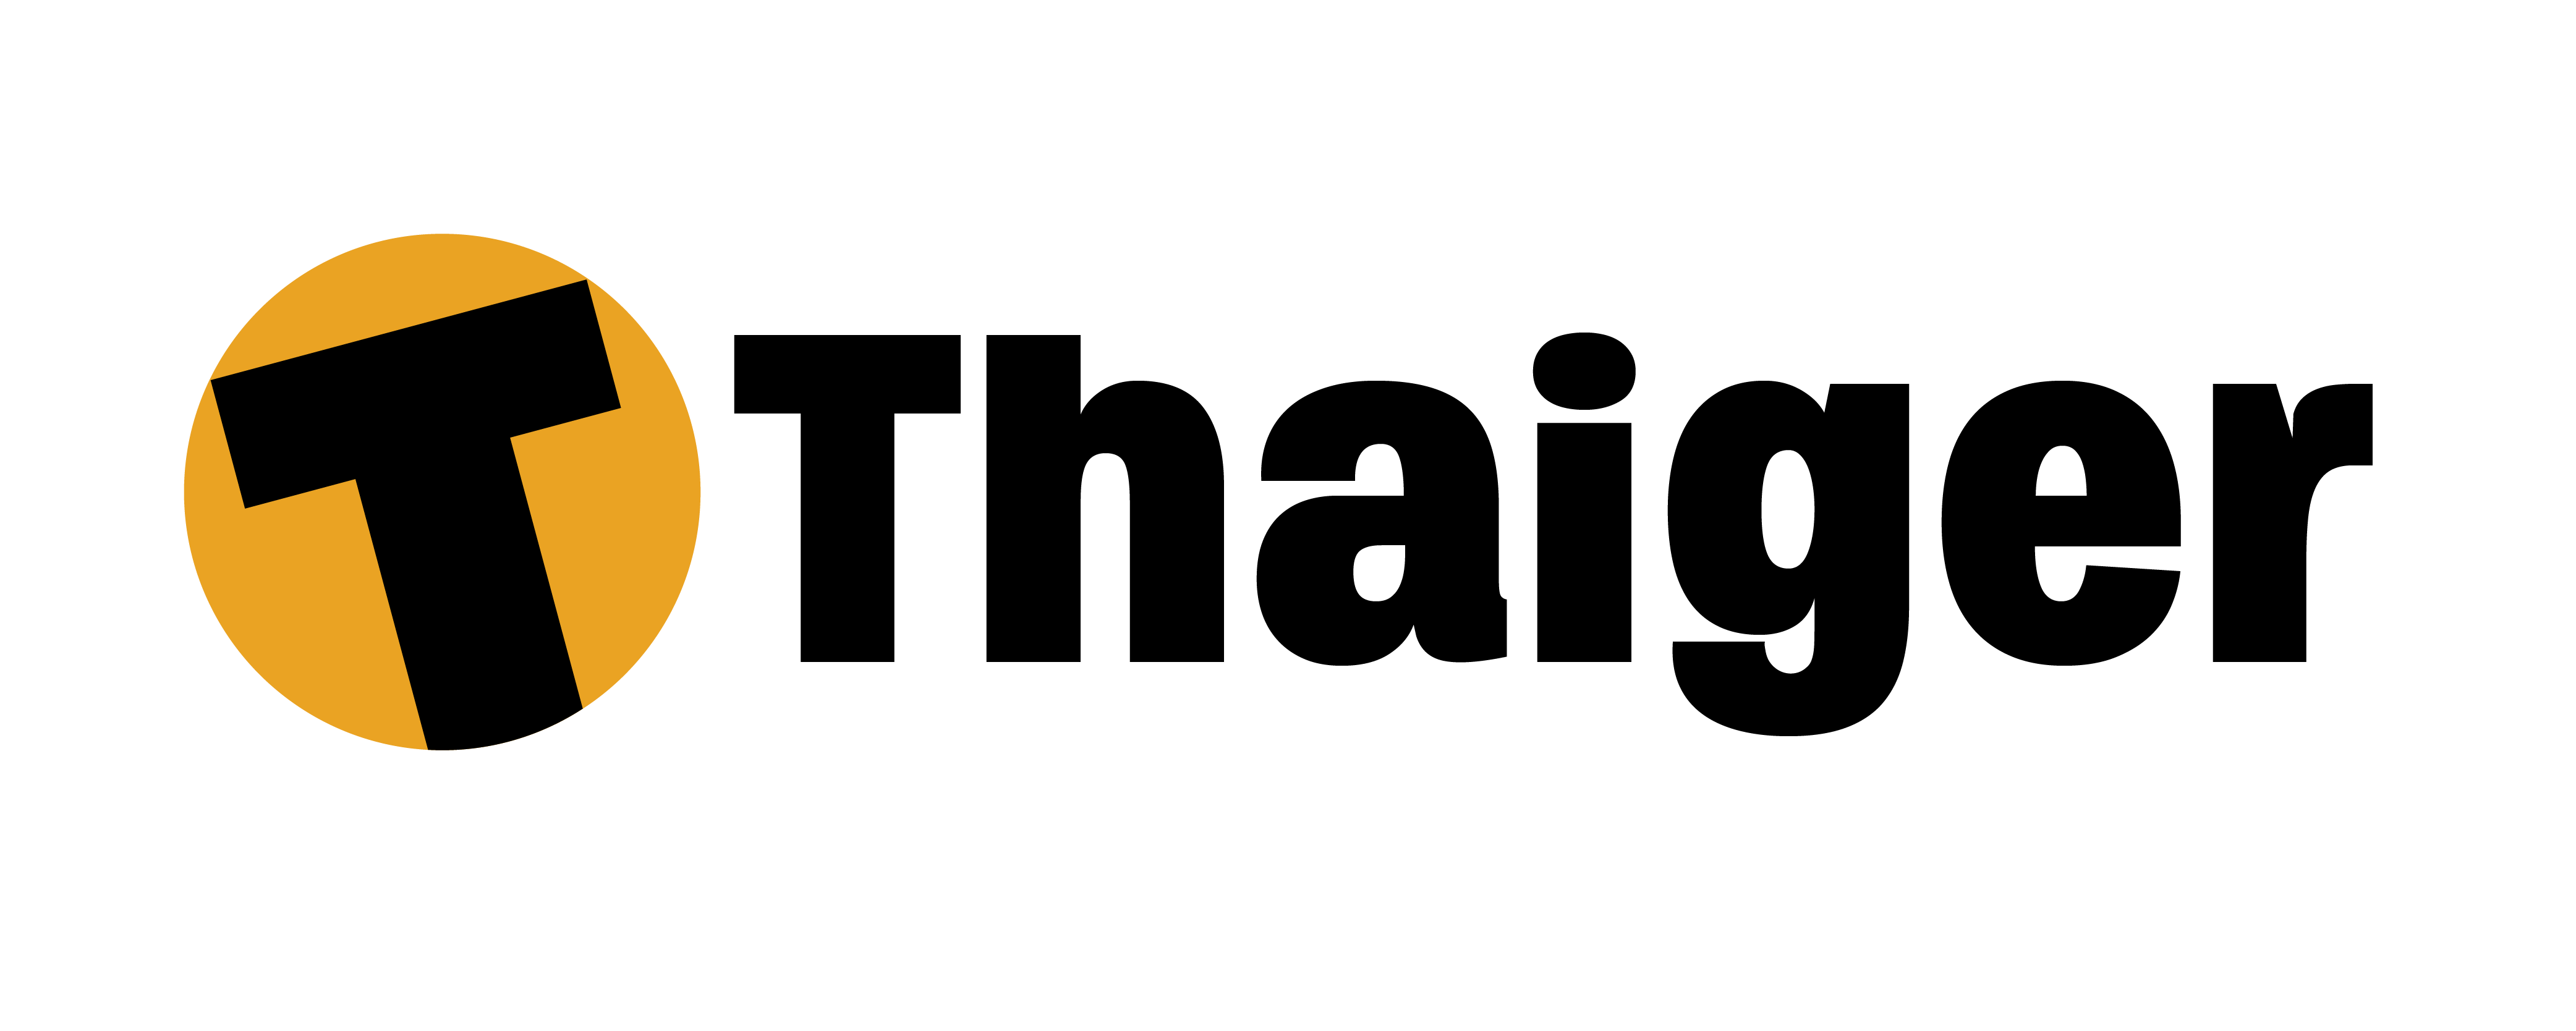 The Thaiger Media Partner at The Thailand International Boat Show